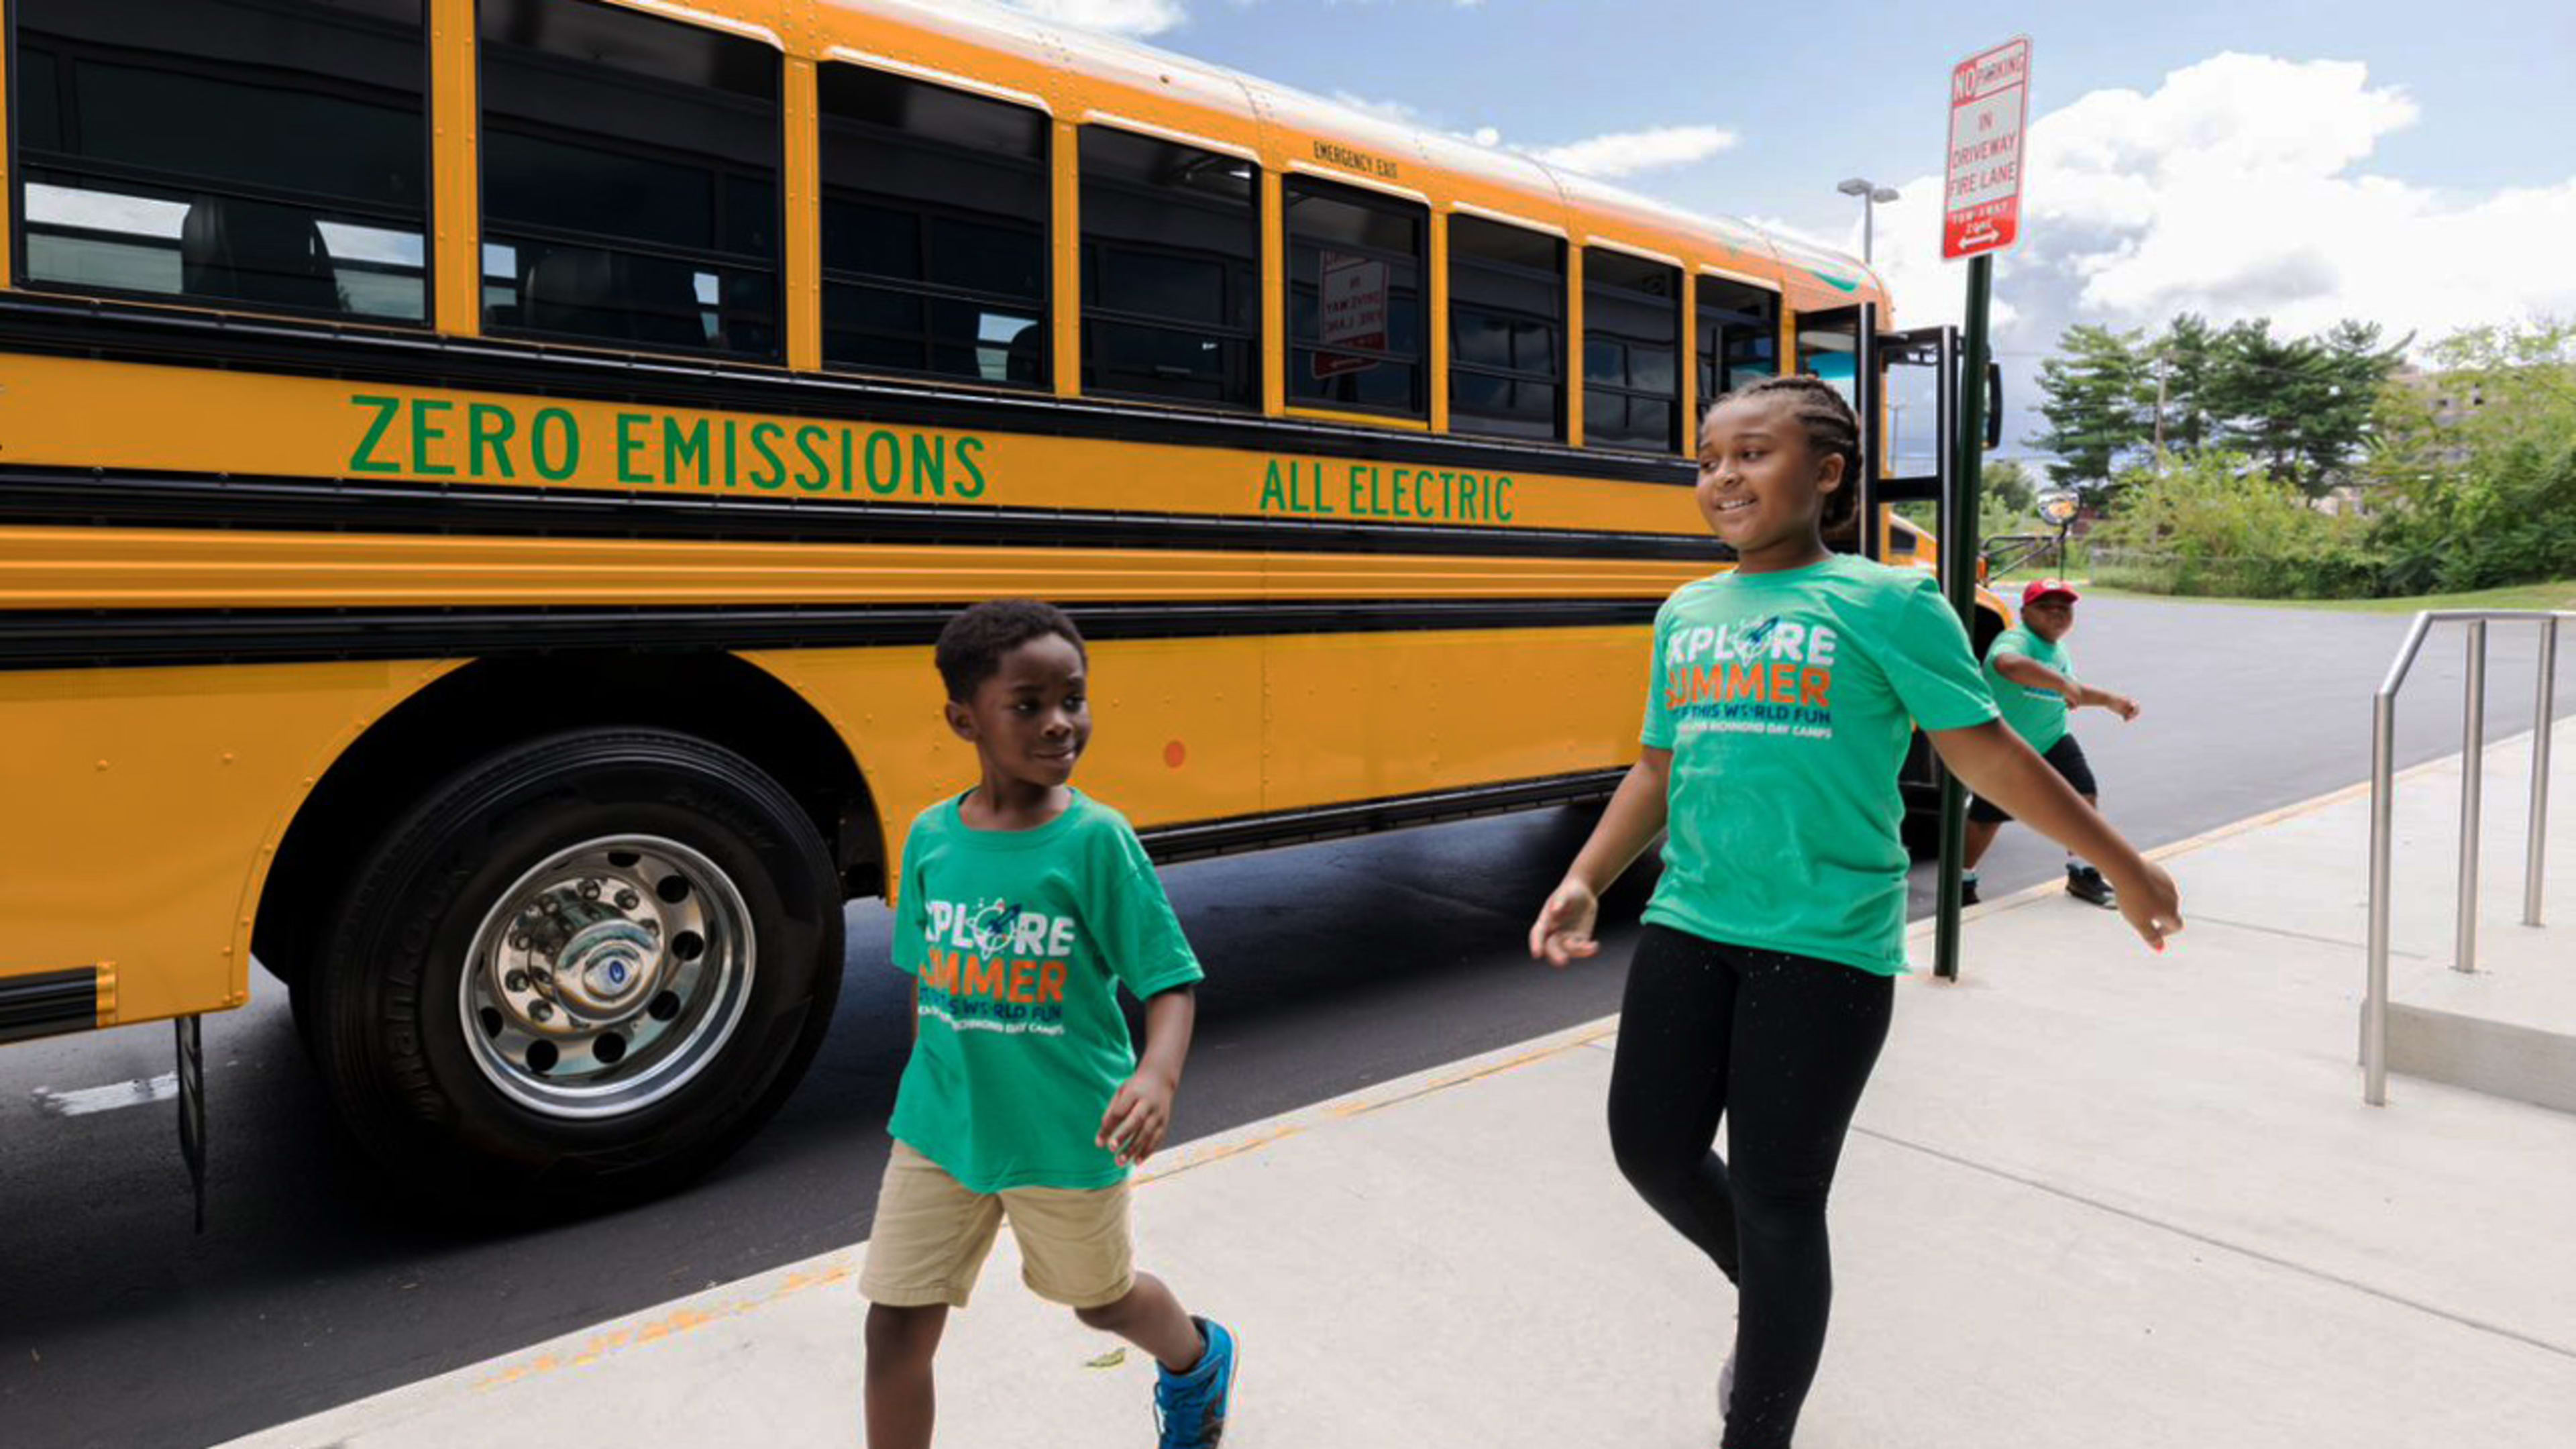 Electric school buses are an ingenious solution to help utilities build more battery storage